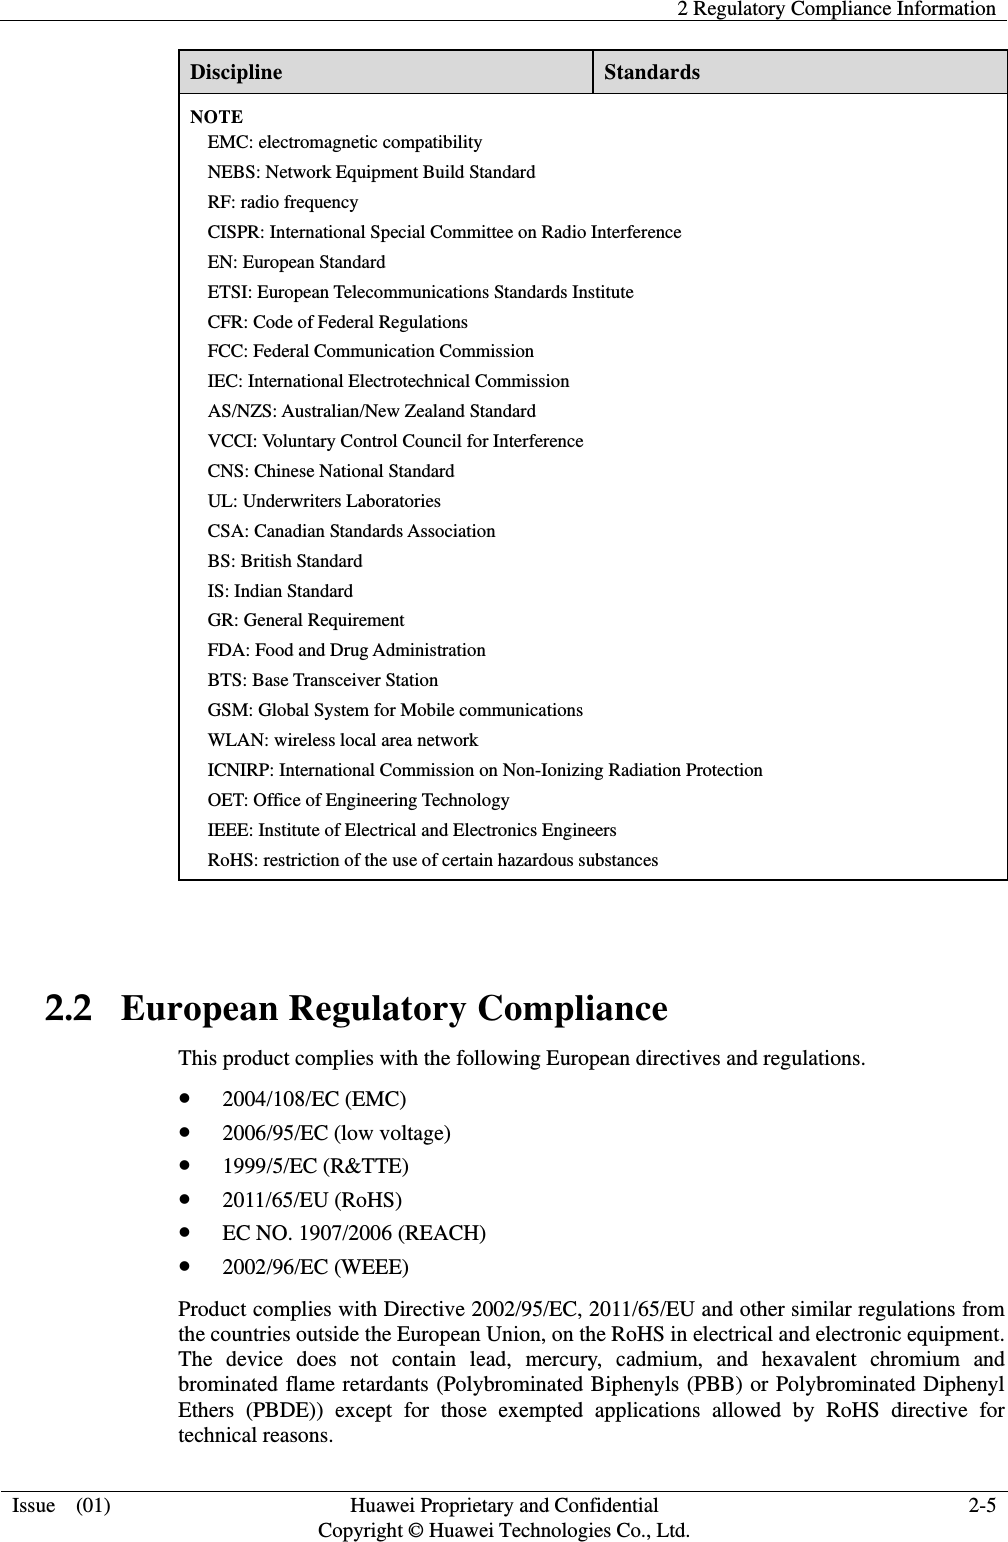   2 Regulatory Compliance Information   Issue    (01)  Huawei Proprietary and Confidential                                     Copyright © Huawei Technologies Co., Ltd.  2-5  Discipline  Standards NOTE EMC: electromagnetic compatibility NEBS: Network Equipment Build Standard RF: radio frequency CISPR: International Special Committee on Radio Interference EN: European Standard ETSI: European Telecommunications Standards Institute CFR: Code of Federal Regulations FCC: Federal Communication Commission IEC: International Electrotechnical Commission AS/NZS: Australian/New Zealand Standard VCCI: Voluntary Control Council for Interference CNS: Chinese National Standard UL: Underwriters Laboratories CSA: Canadian Standards Association BS: British Standard IS: Indian Standard GR: General Requirement FDA: Food and Drug Administration BTS: Base Transceiver Station GSM: Global System for Mobile communications WLAN: wireless local area network ICNIRP: International Commission on Non-Ionizing Radiation Protection OET: Office of Engineering Technology IEEE: Institute of Electrical and Electronics Engineers RoHS: restriction of the use of certain hazardous substances  2.2   European Regulatory Compliance This product complies with the following European directives and regulations.  2004/108/EC (EMC)  2006/95/EC (low voltage)  1999/5/EC (R&amp;TTE)  2011/65/EU (RoHS)  EC NO. 1907/2006 (REACH)  2002/96/EC (WEEE) Product complies with Directive 2002/95/EC, 2011/65/EU and other similar regulations from the countries outside the European Union, on the RoHS in electrical and electronic equipment. The  device  does  not  contain  lead,  mercury,  cadmium,  and  hexavalent  chromium  and brominated flame retardants (Polybrominated Biphenyls (PBB) or Polybrominated Diphenyl Ethers  (PBDE))  except  for  those  exempted  applications  allowed  by  RoHS  directive  for technical reasons.   